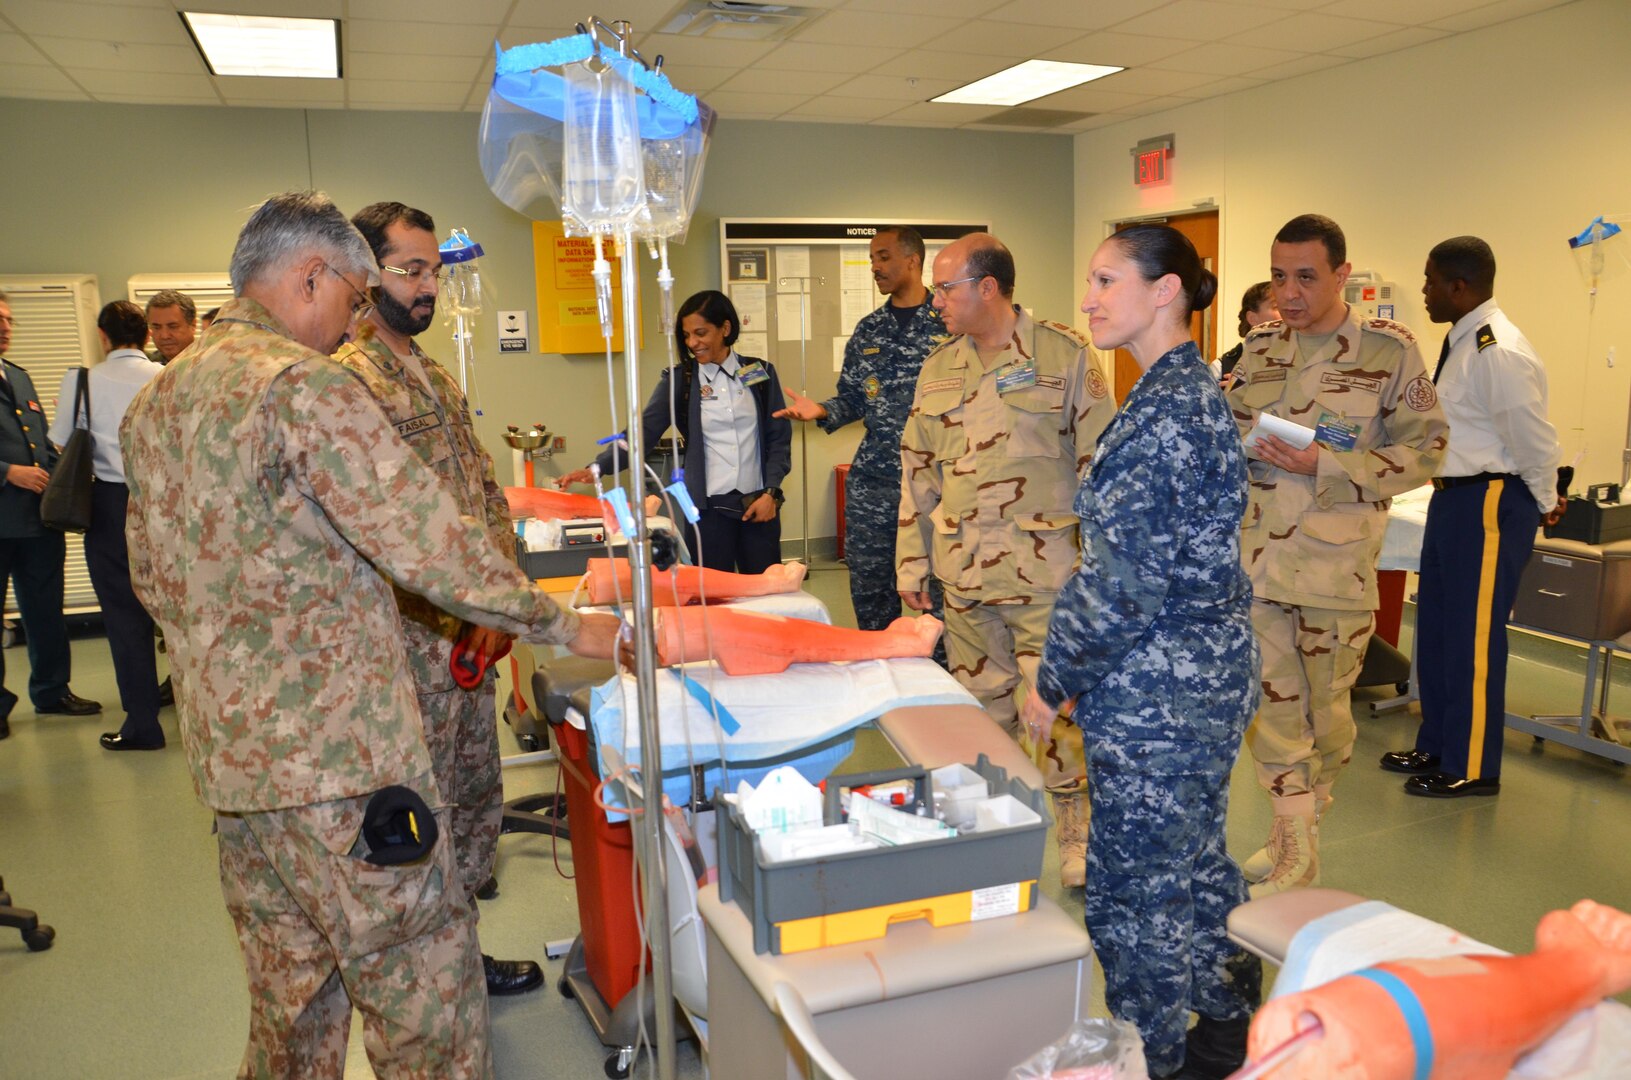 Participants in the CENTCOM Theater Medical Conference tour the “dead stick lab”, which is a laboratory used in the Basic Medical Technician Corpsman Program, where students practice intravenous (IV) and venipuncture skills on simulated arms. Medical professionals representing more than 10 countries within the US Central Command area of operation, Europe, and the U.S. attended the conference to aid in the continued development of capabilities that will serve to improve regional interoperability and cooperation. (Medical Education and Training Campus Public Affairs photo by Lisa Braun/Released)